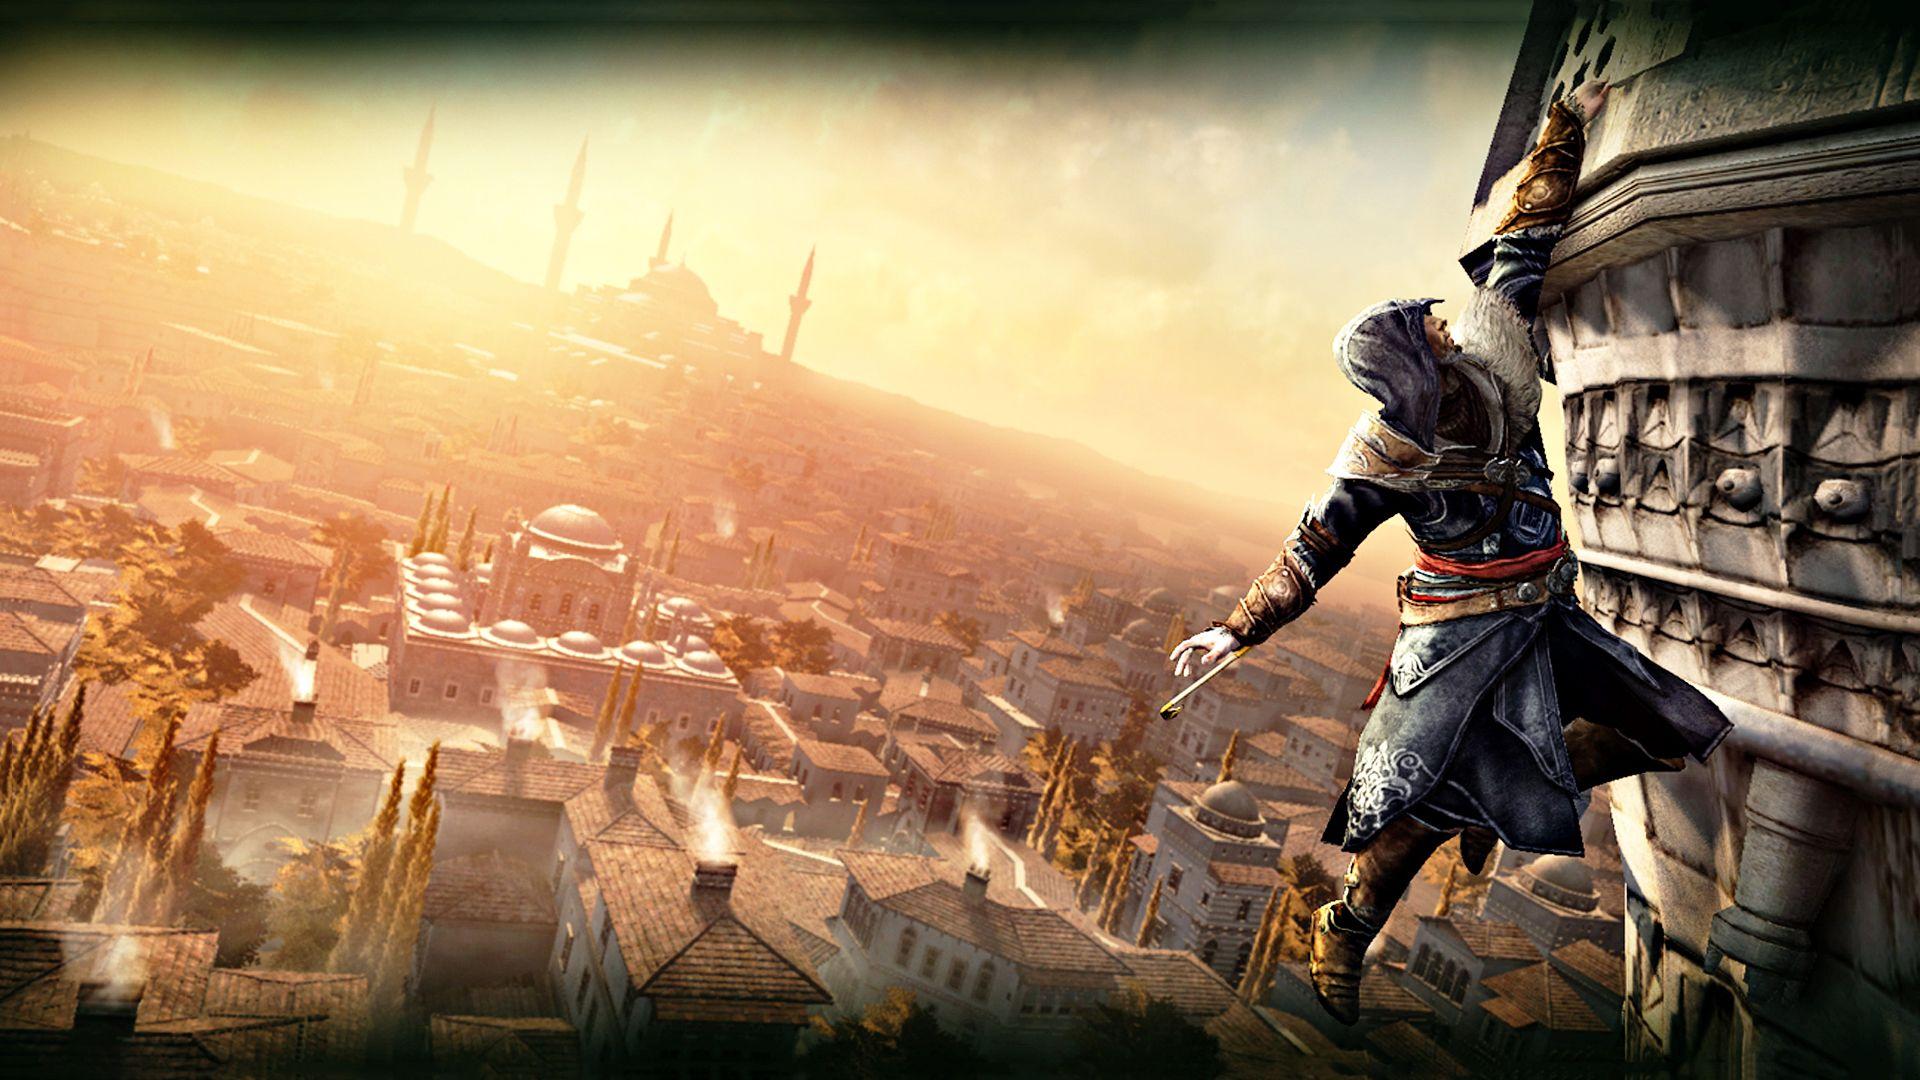 Assassin's Creed II Wallpapers - Wallpaper Cave